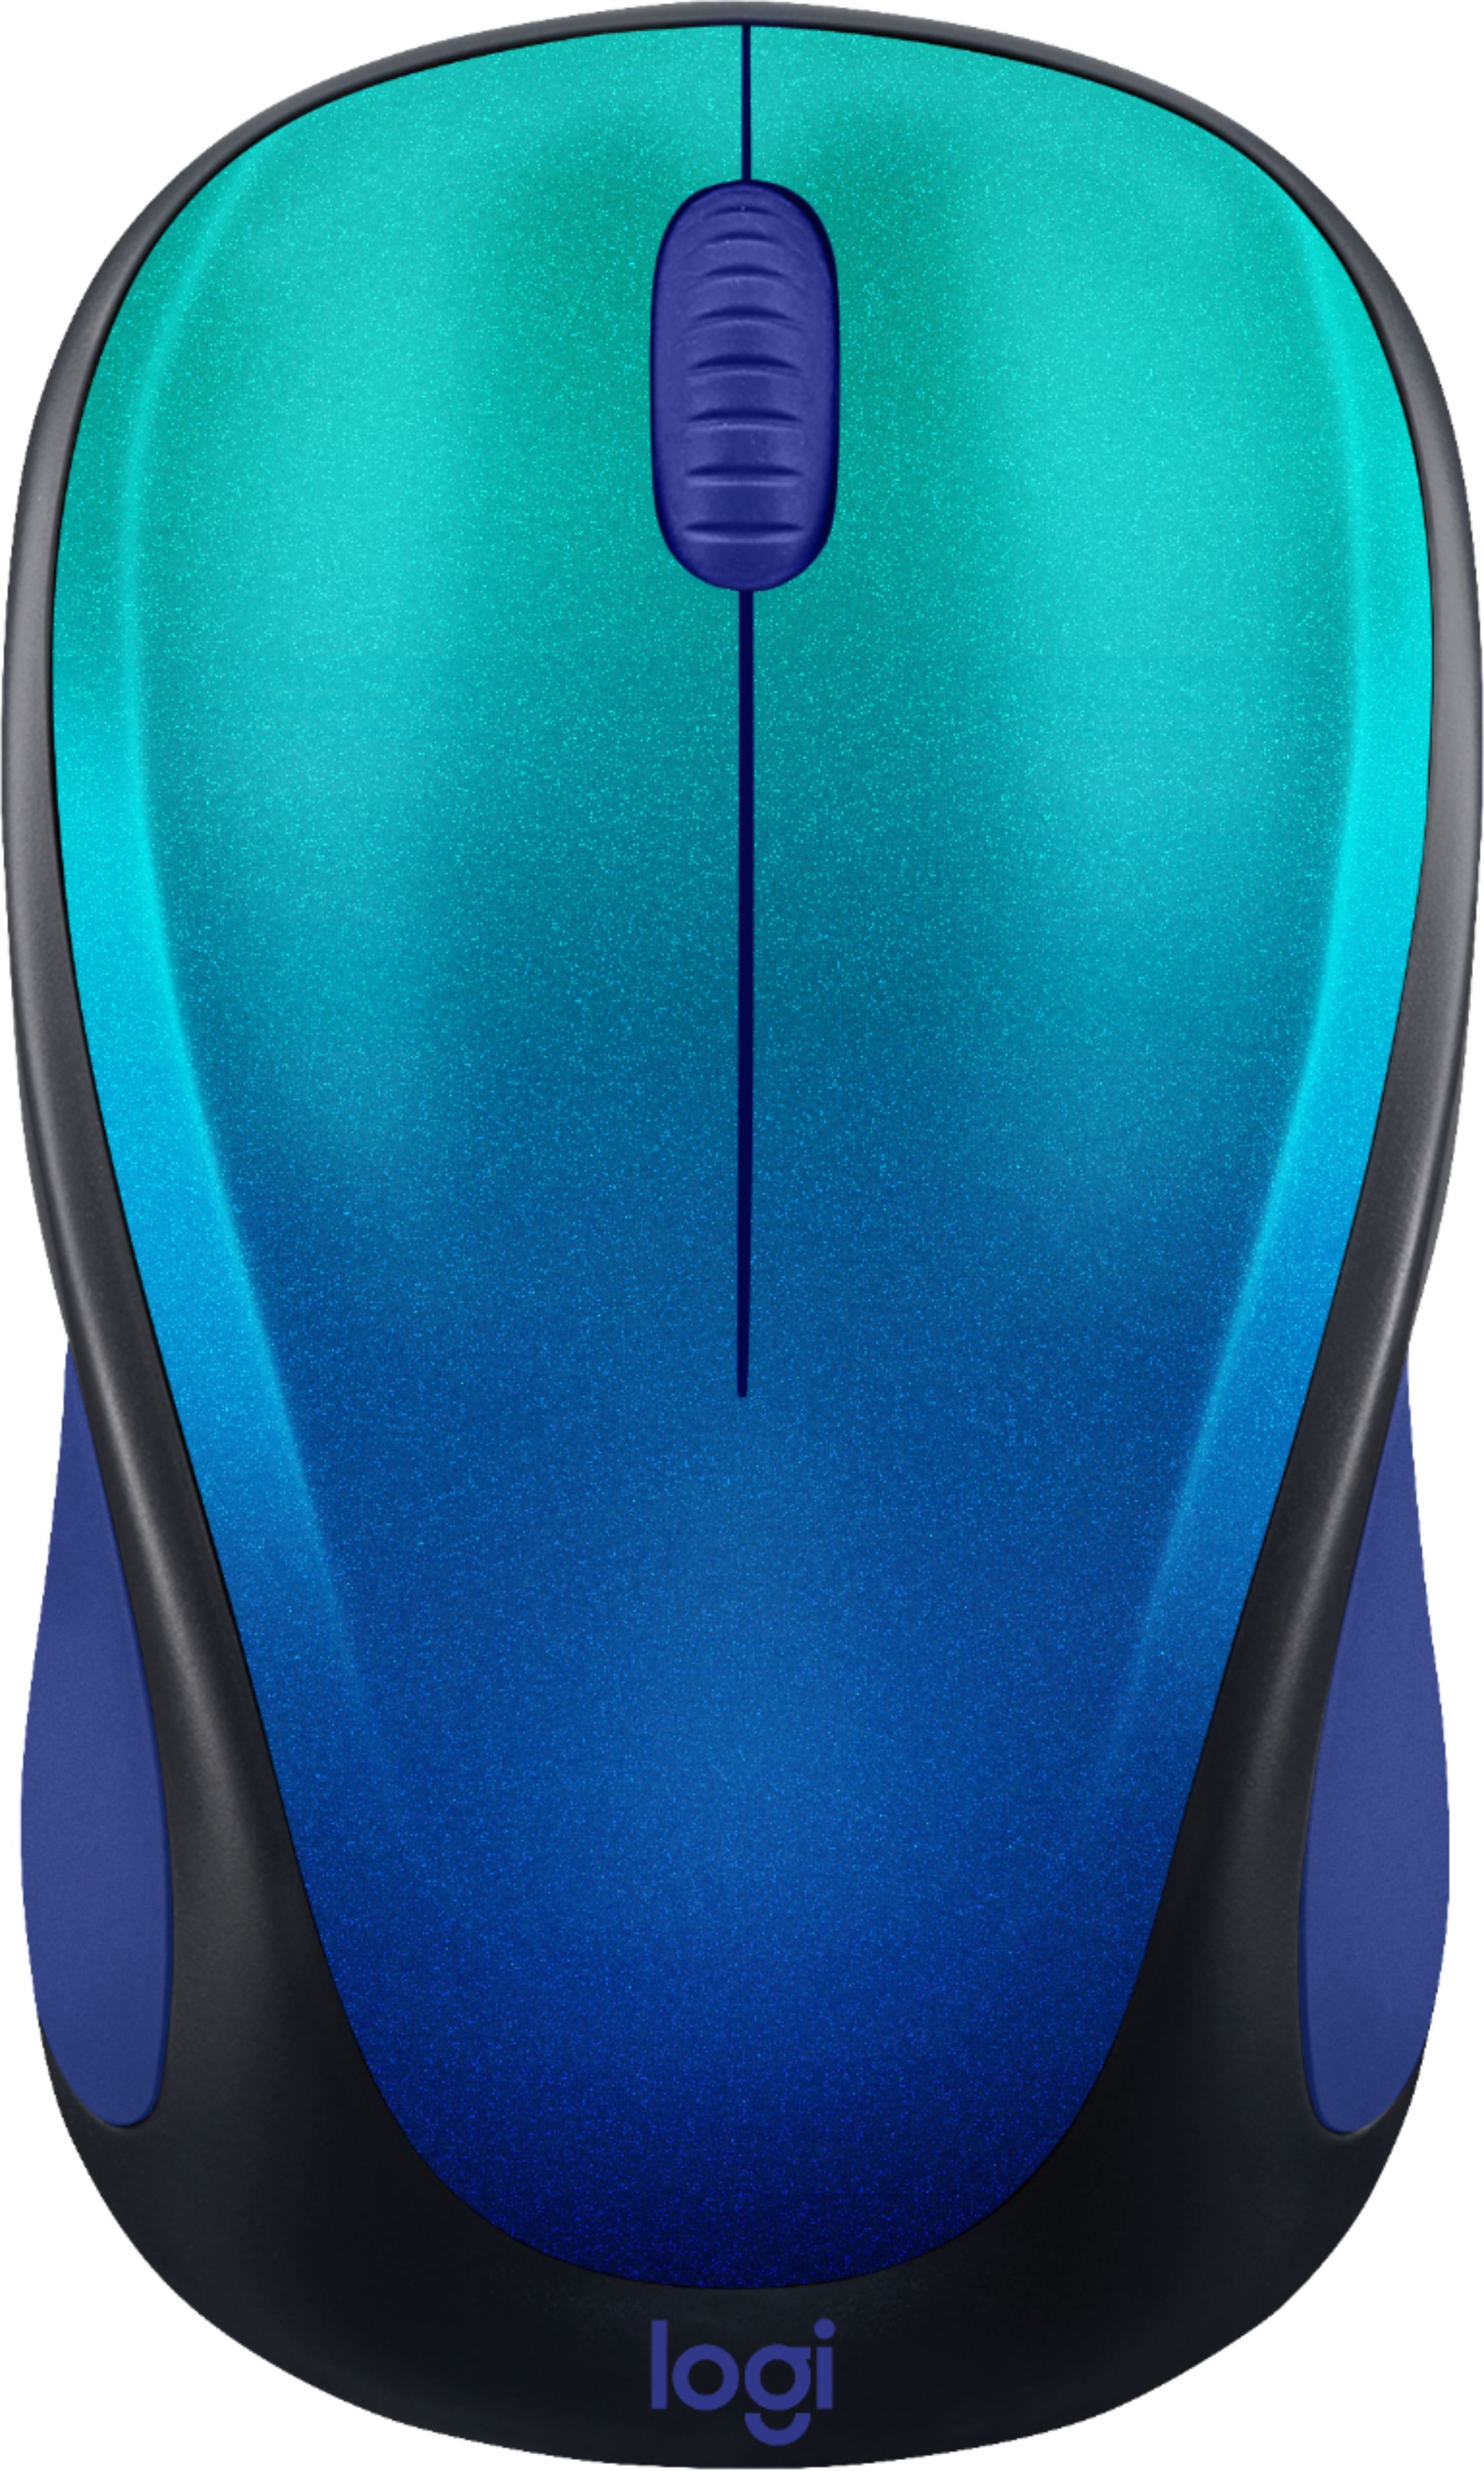 How to Connect a Logitech Wireless Mouse to Any Computer